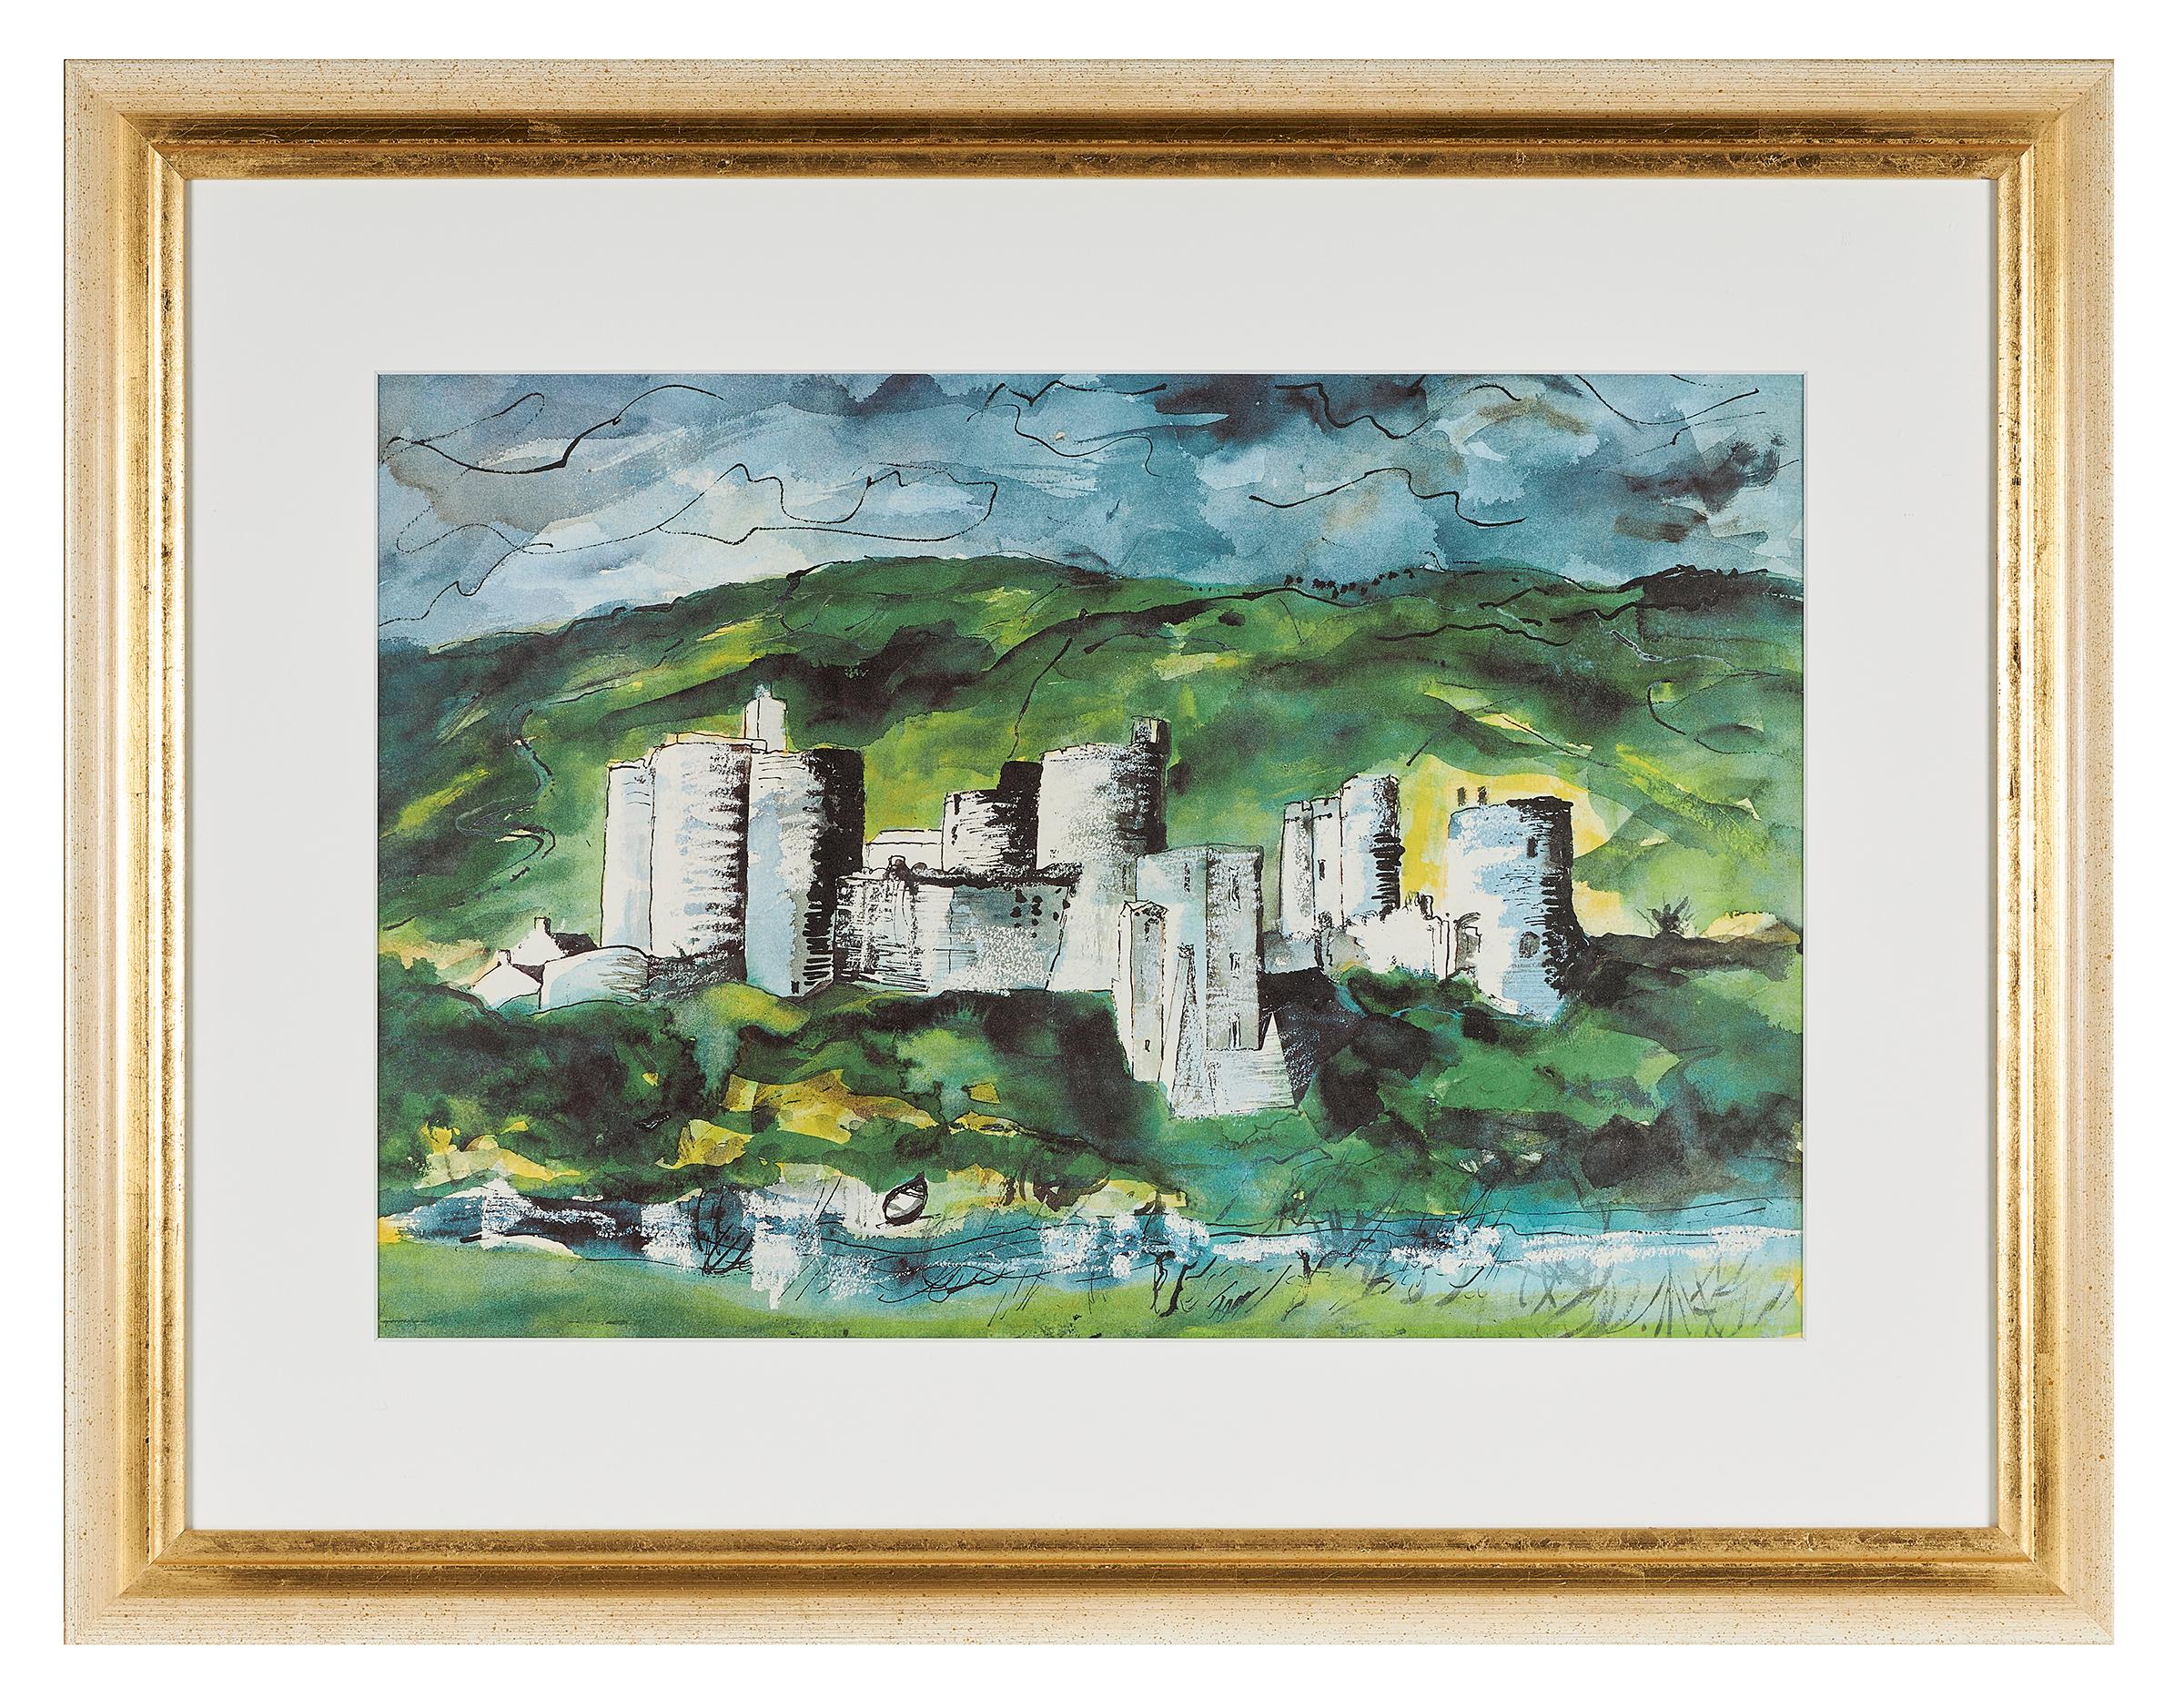 John Piper (British, 1903-1992), 'Kidwelly Castle', color lithograph on wove paper, printed in 1984 by Senecio Press, from an edition of 20 prints supplied with the book ‘Deaths and Entrances’ by Dylan Thomas (illustrated by Piper), mounted and